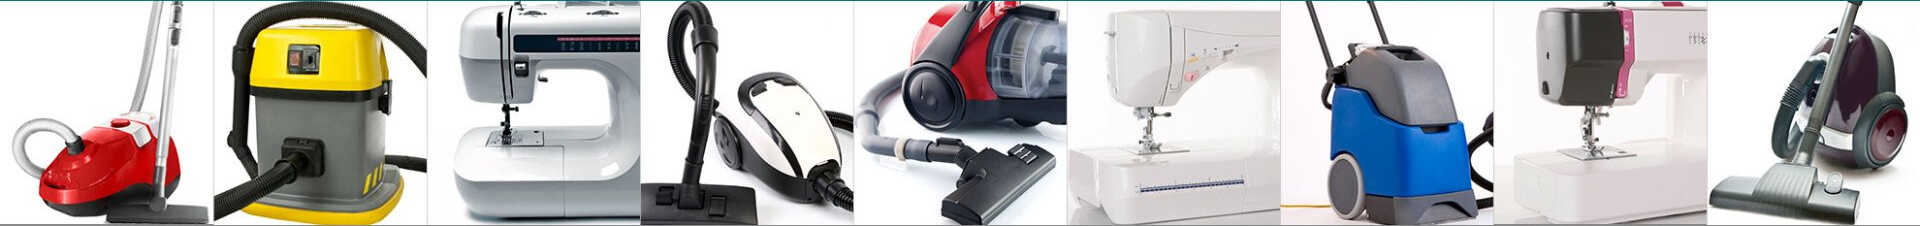 Vacuum Cleaners and Sewing Machines